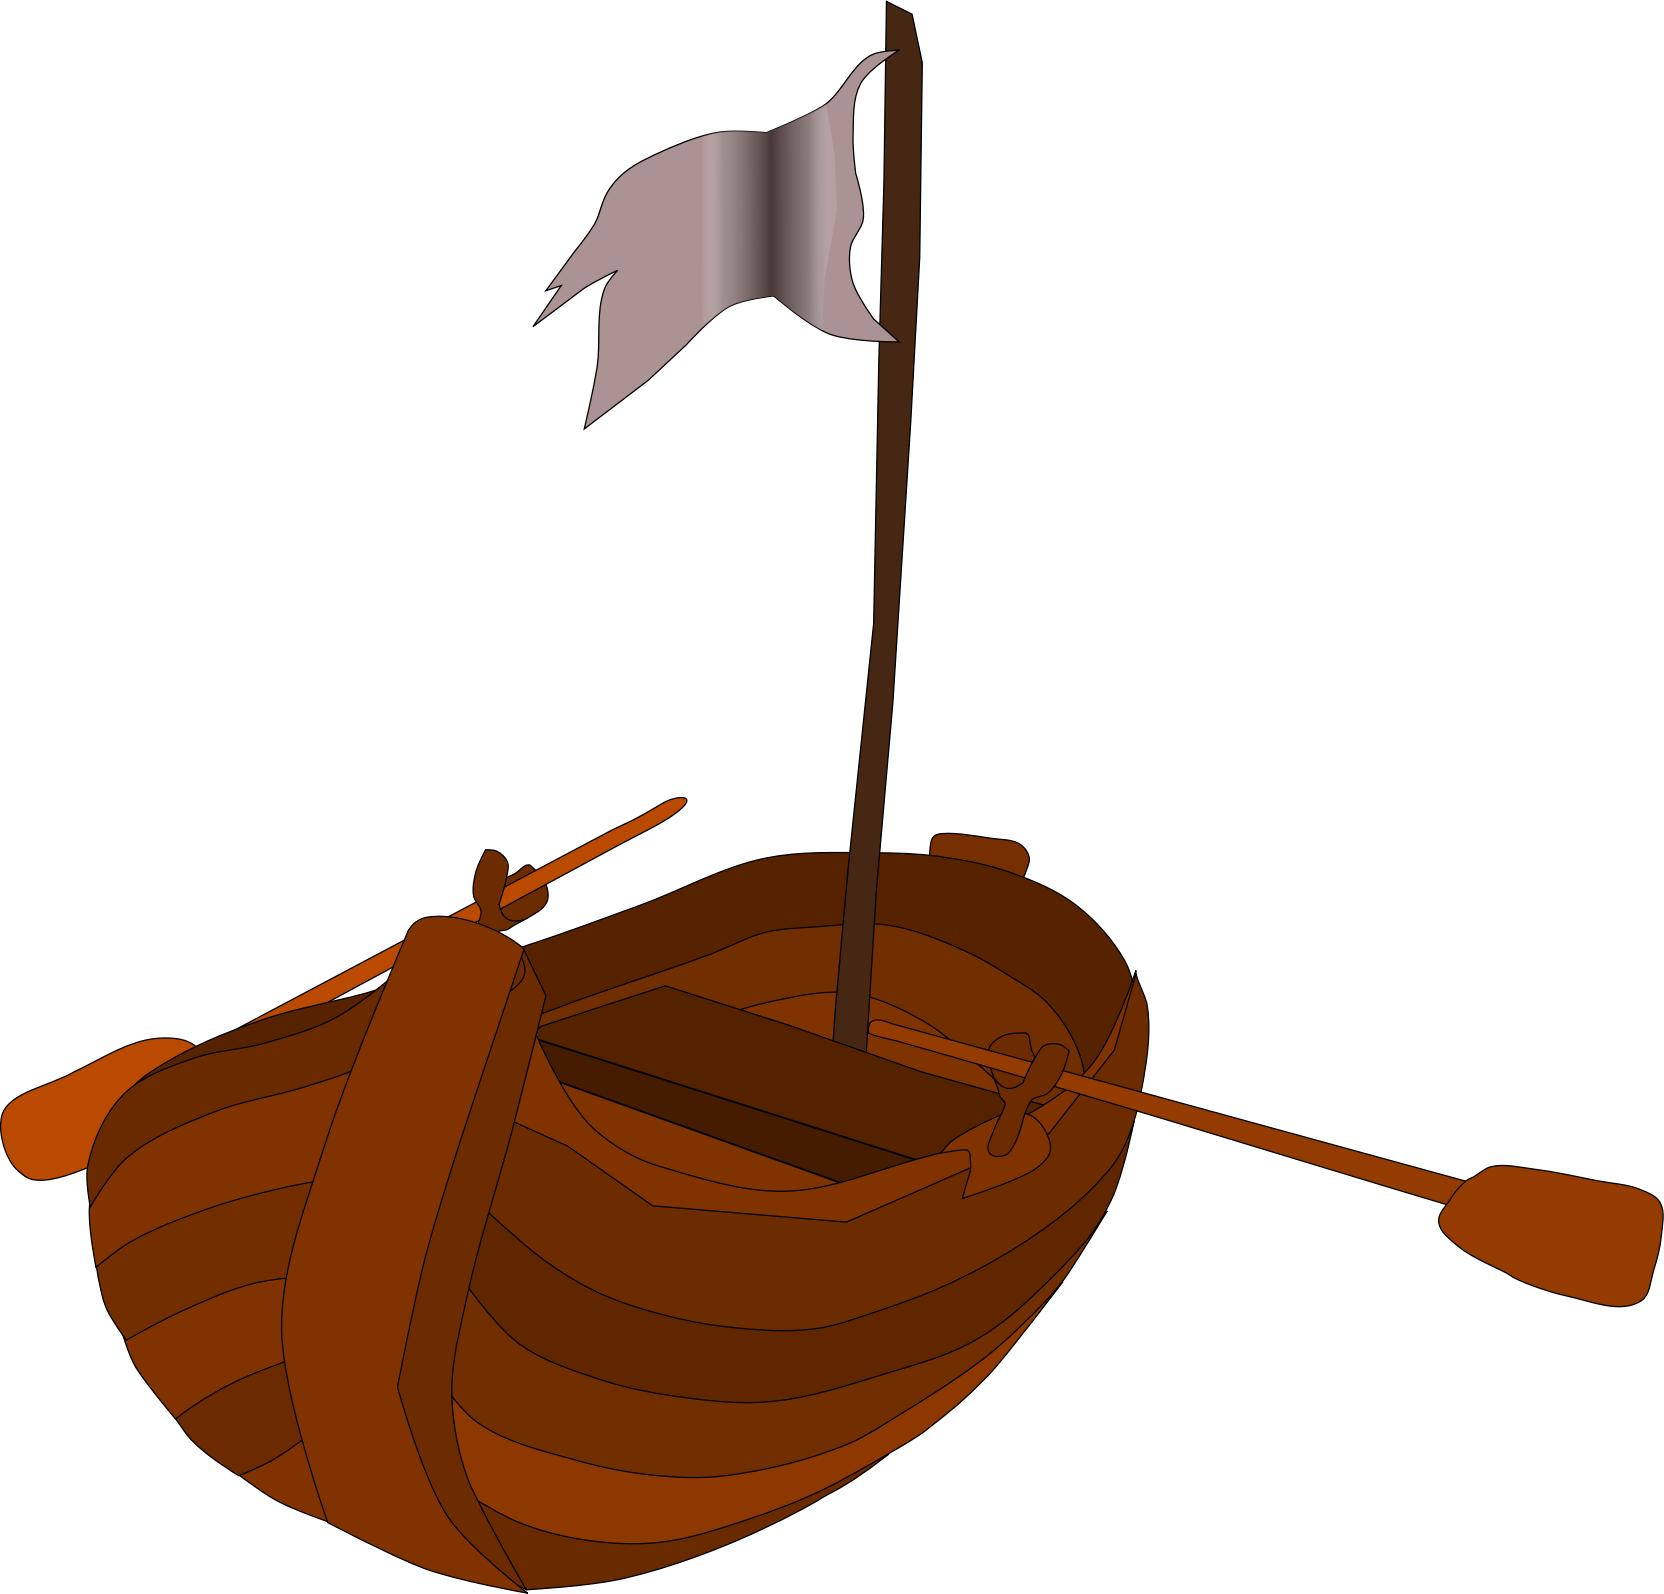 A pirate rowboat png